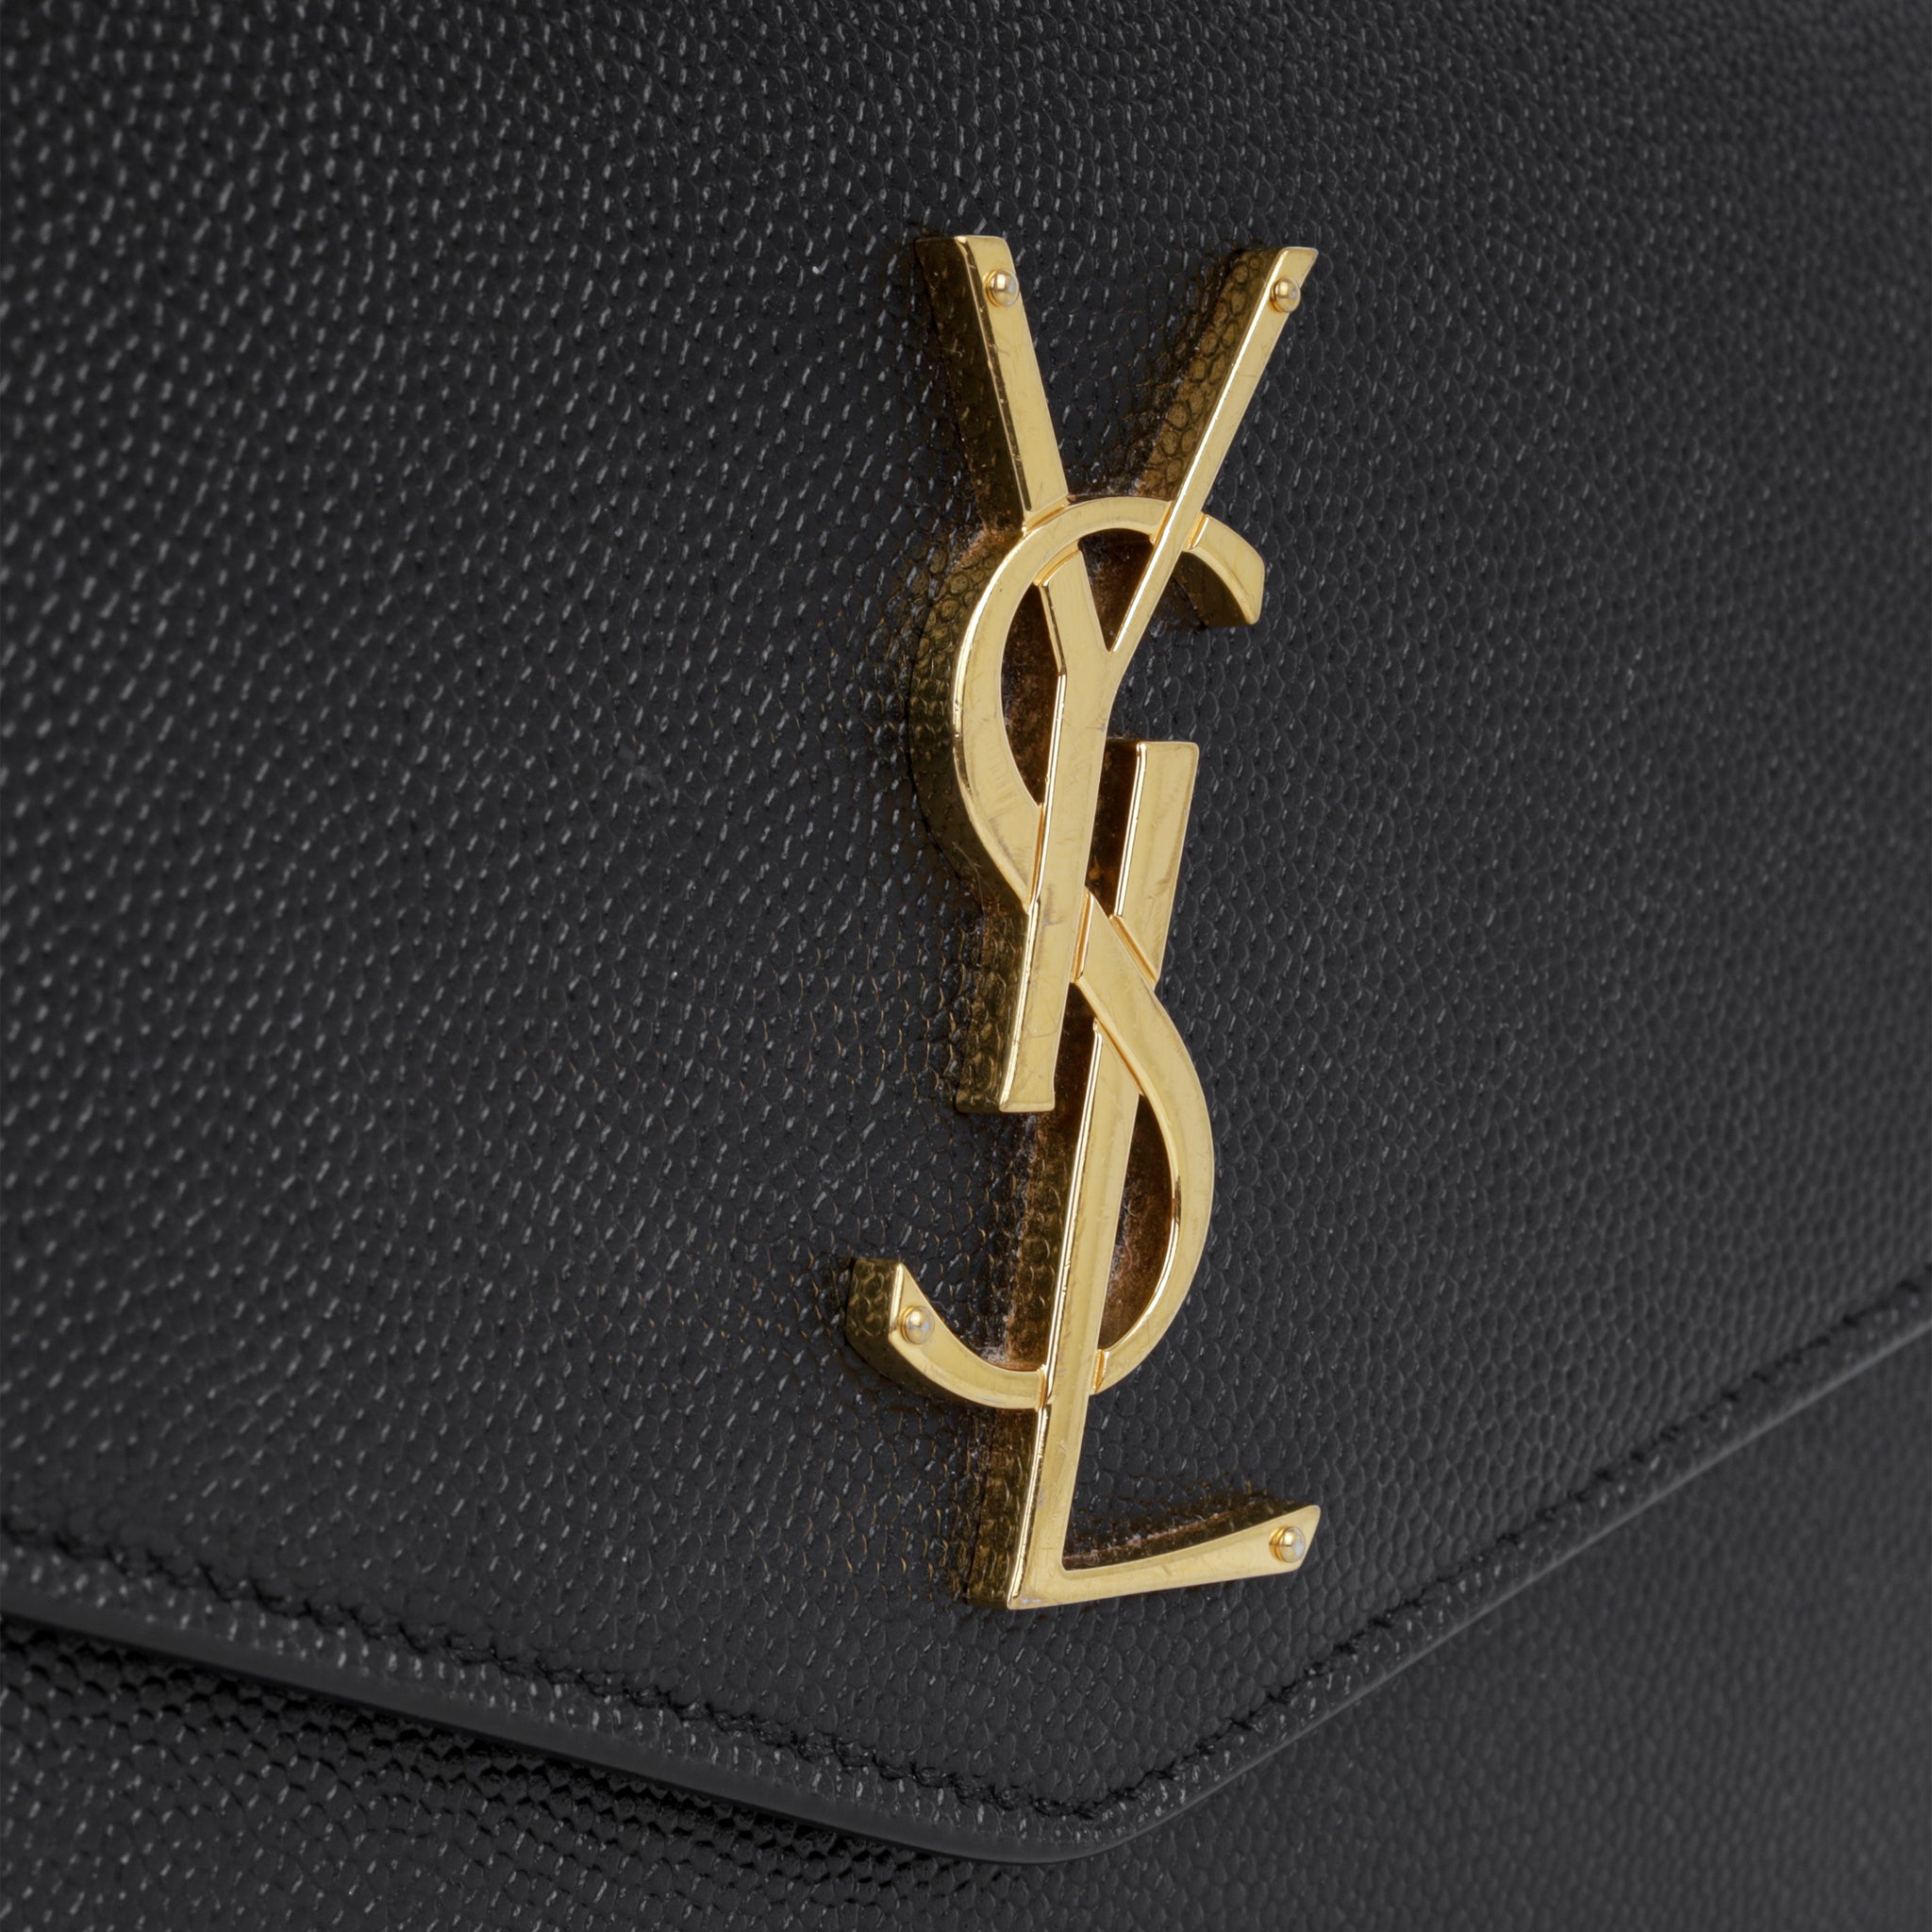 Uptown Leather Wallet On Chain in Black - Saint Laurent